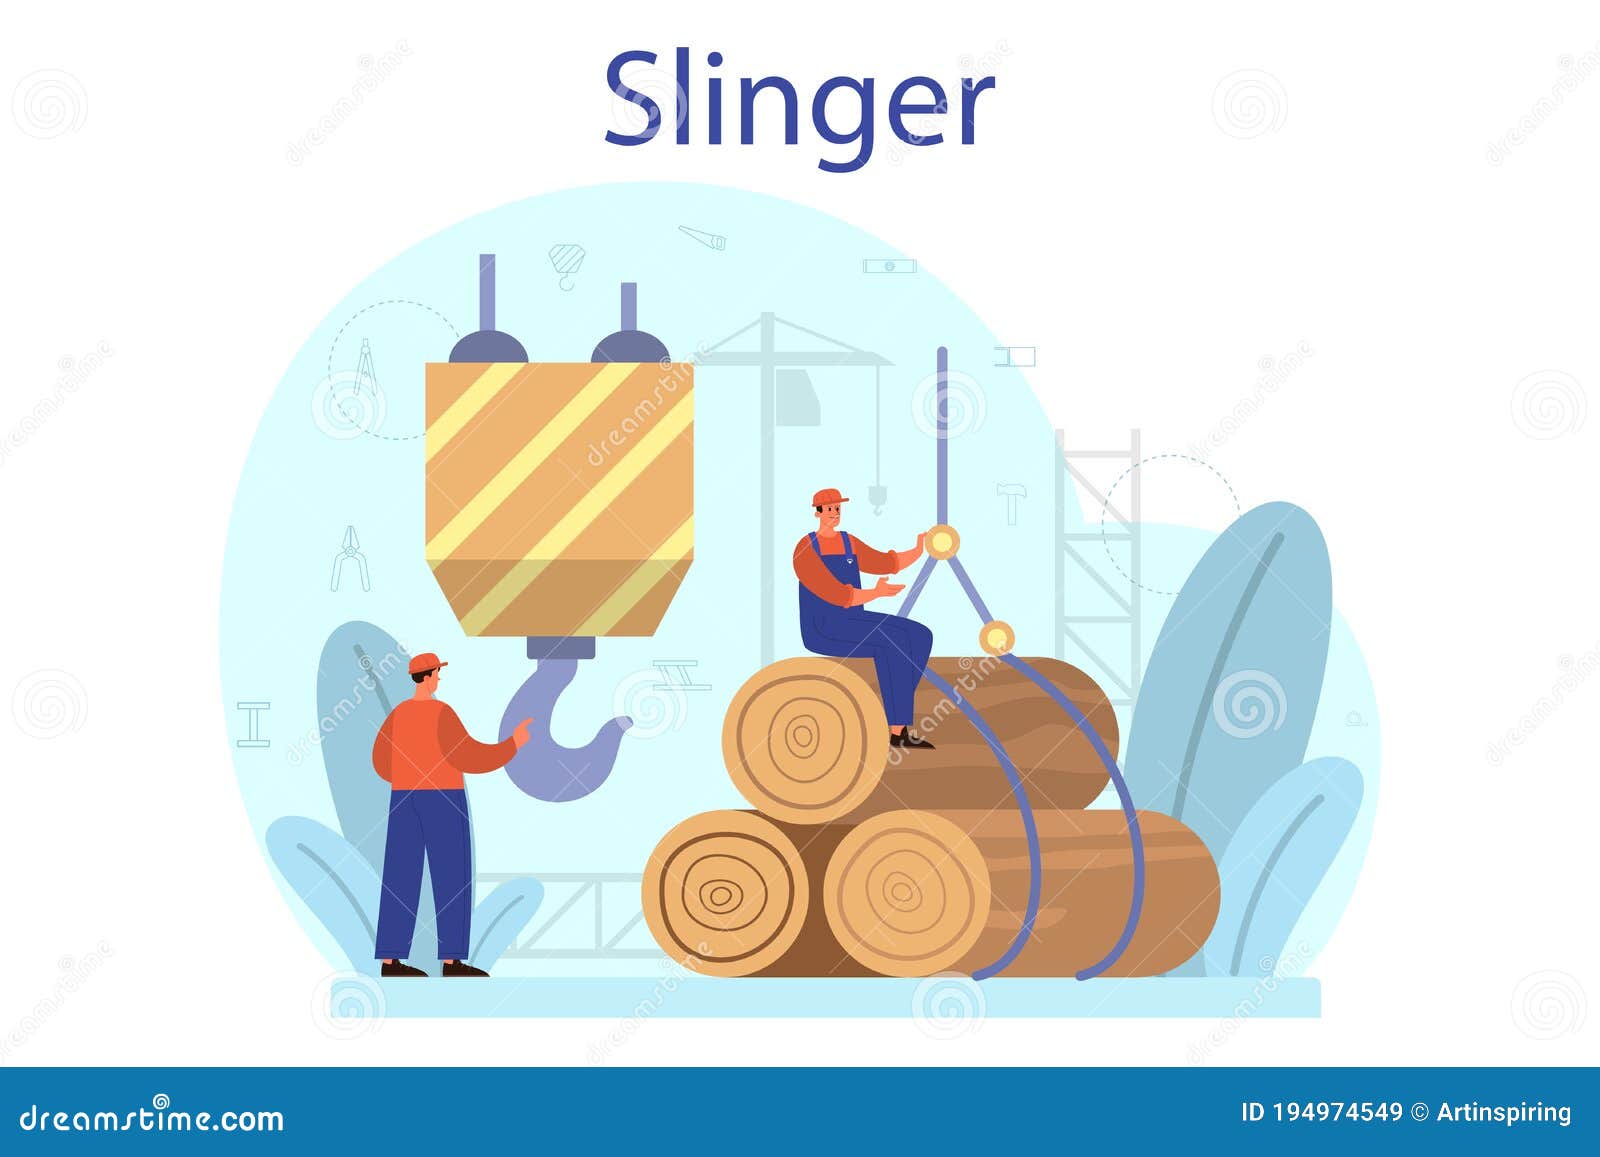 slinger. professional workers of constructing industry slinging